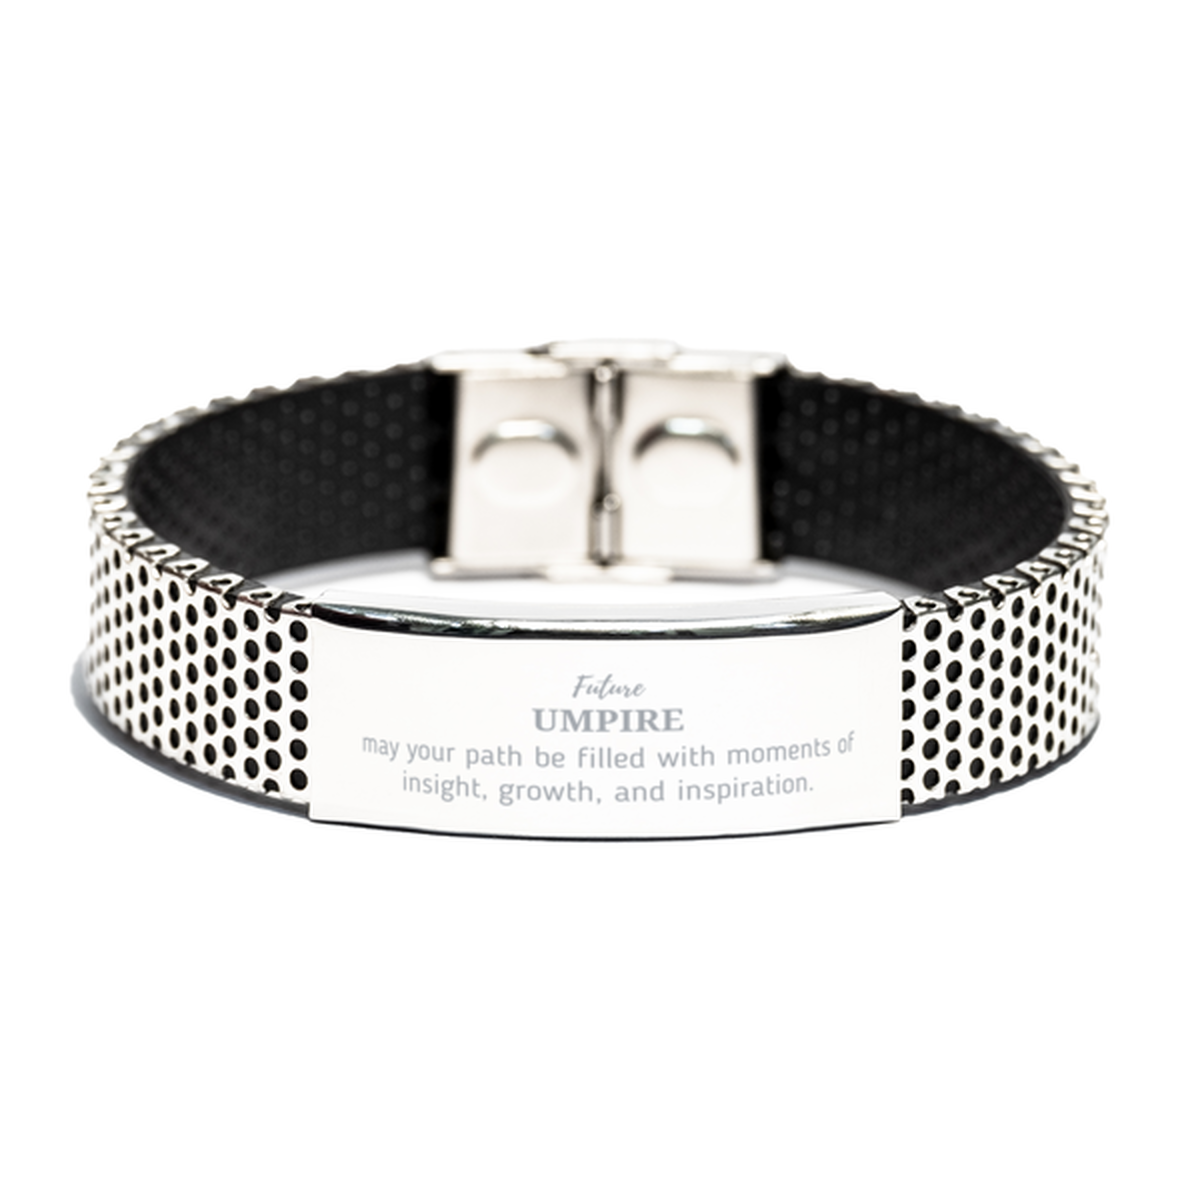 Future Umpire Gifts, May your path be filled with moments of insight, Graduation Gifts for New Umpire, Christmas Unique Stainless Steel Bracelet For Men, Women, Friends